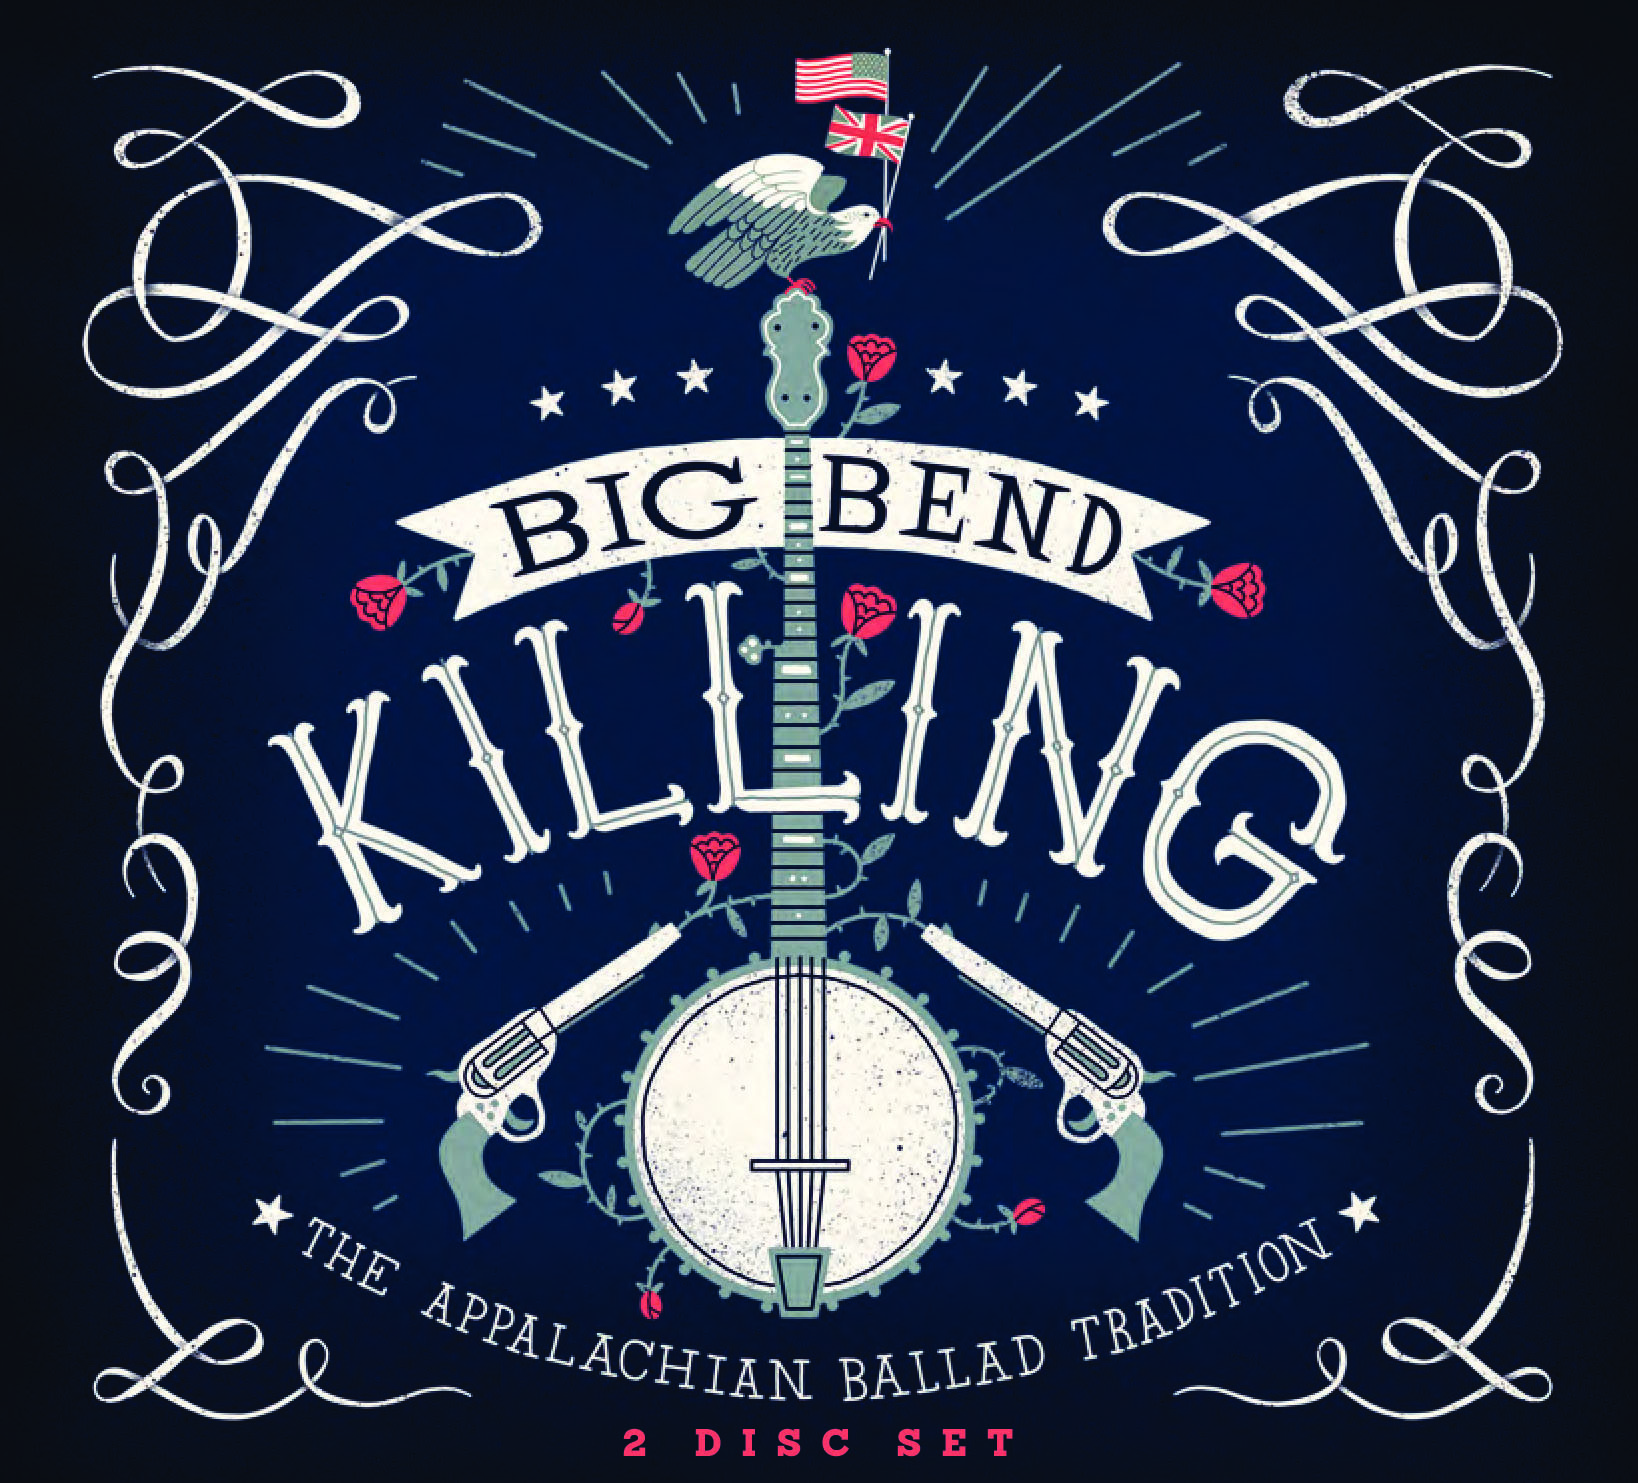 Released in 2017, "Big Bend Killing" features recordings of old and new world Appalachian ballads performed by leading U.K. and American roots music luminaries.